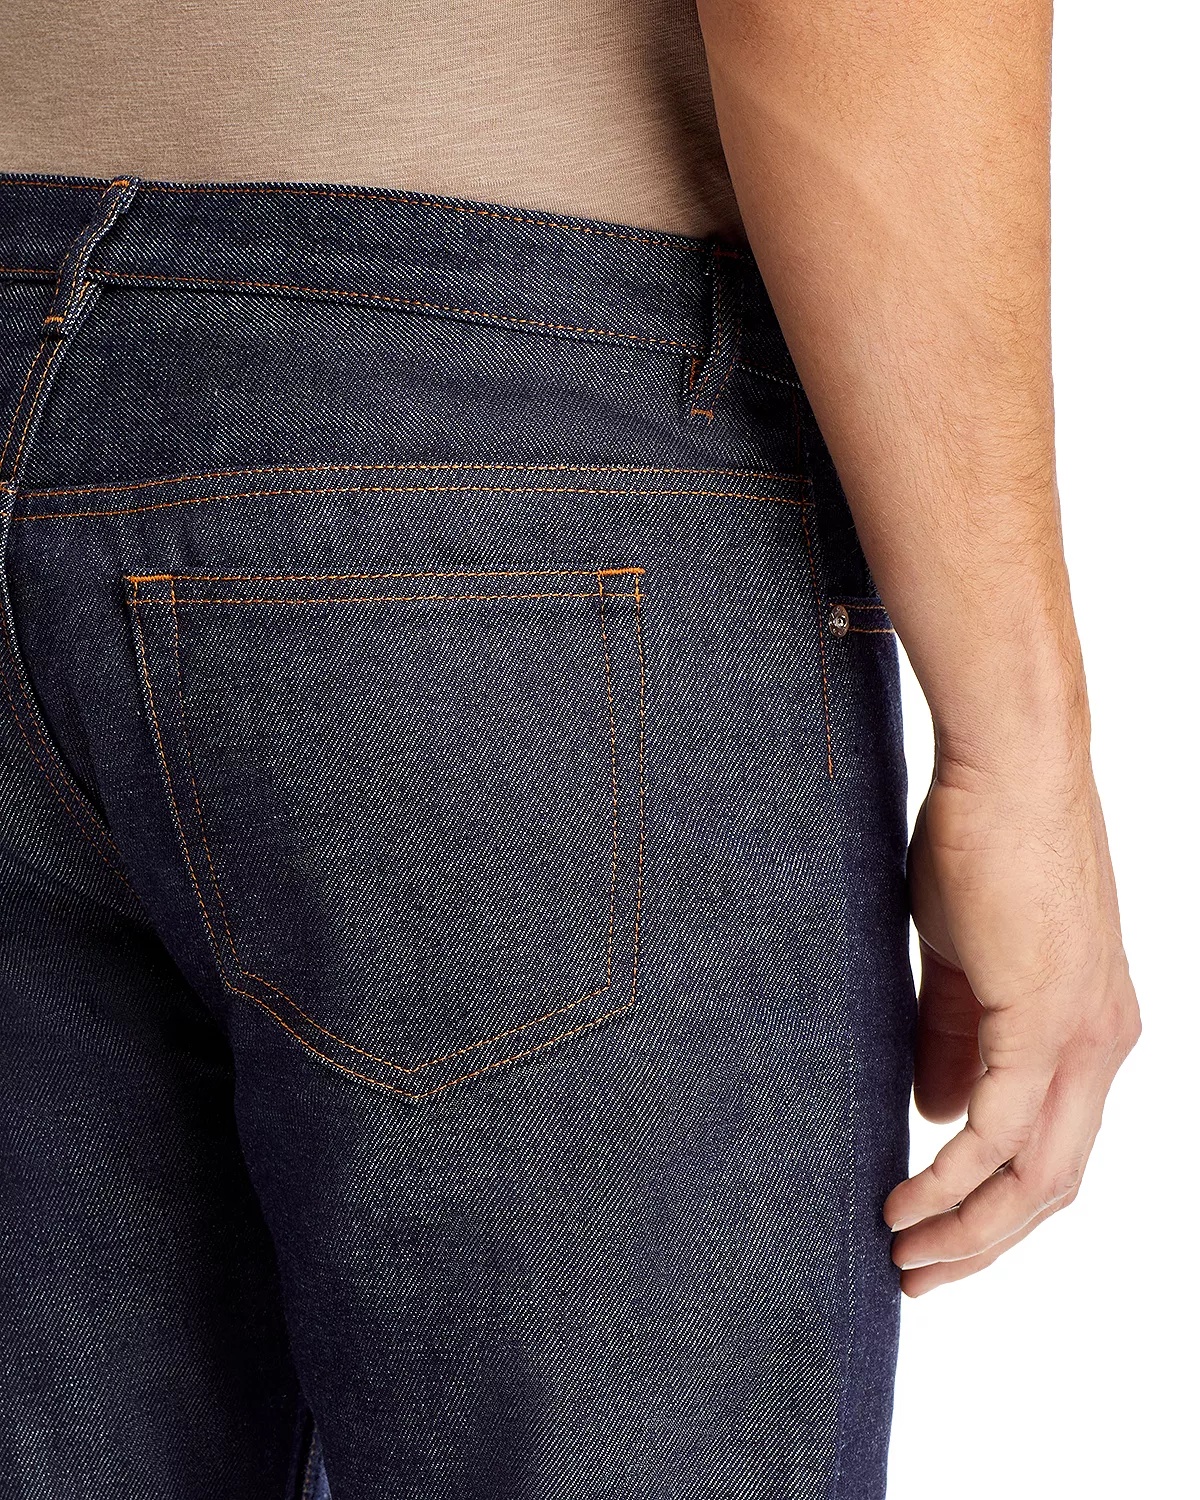 New Standard Straight Fit Jeans in Indigo - 5